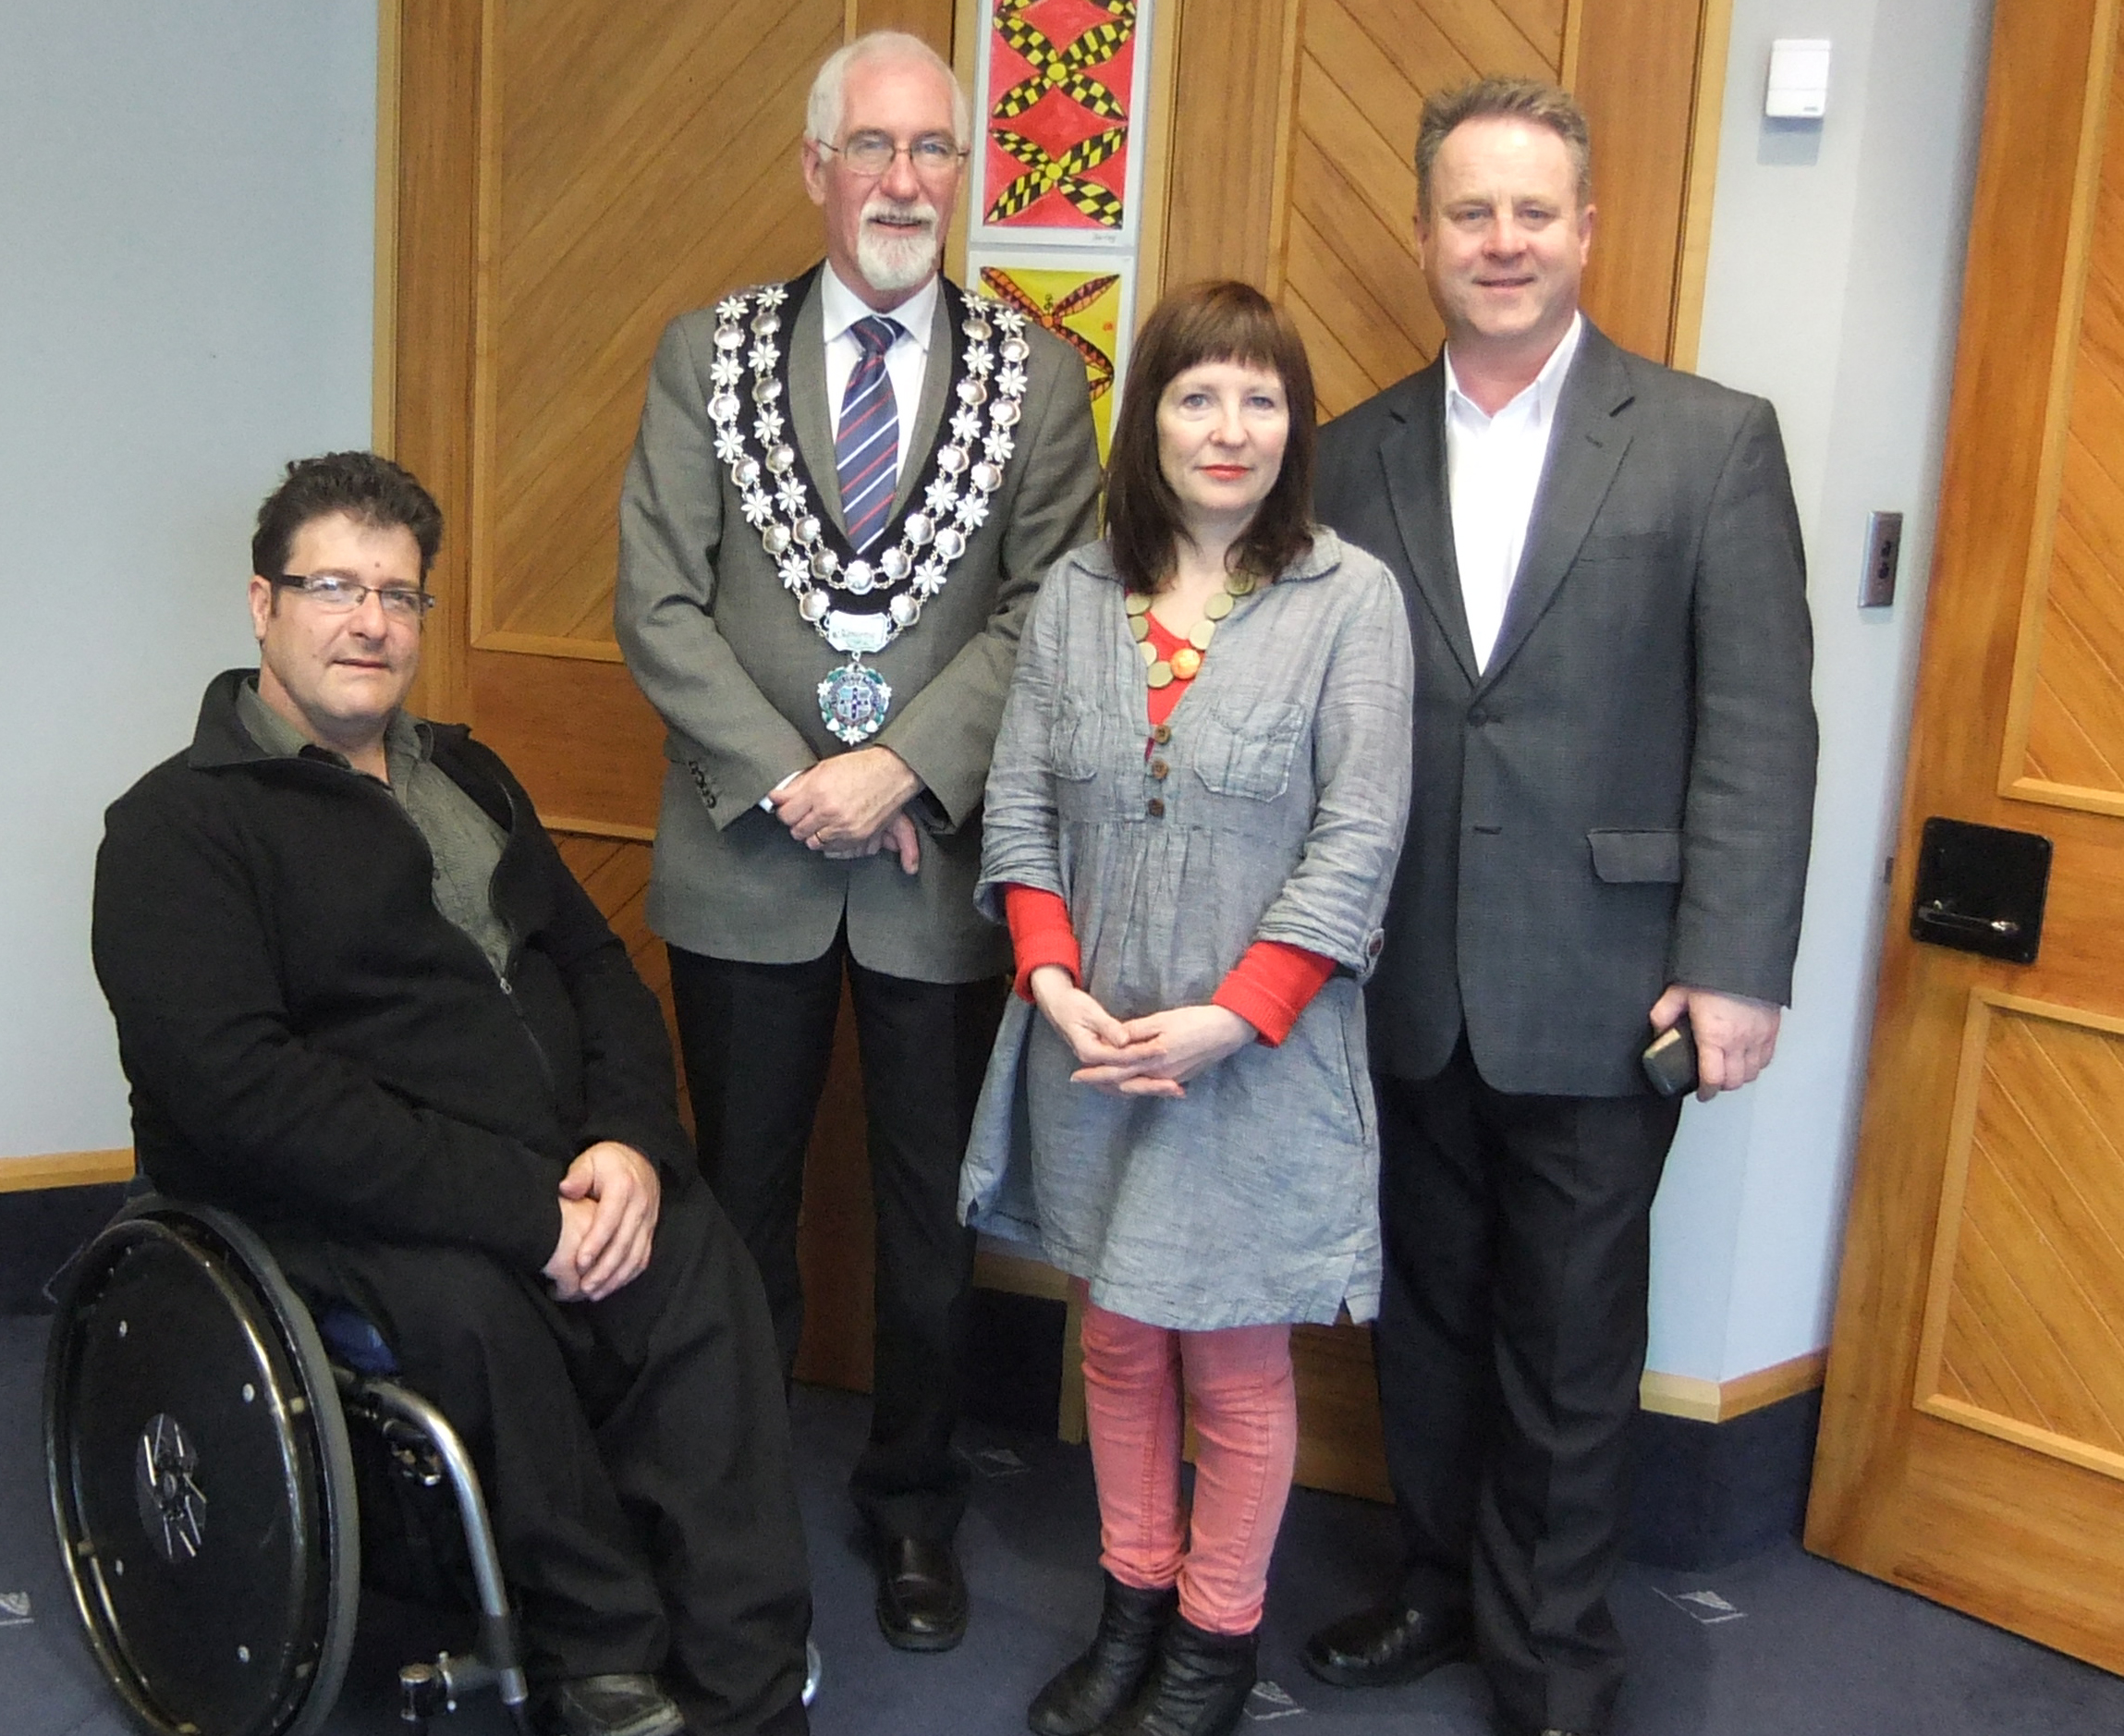 Stew Sexton, Pippa Sanderson and Richard Benge of Arts Access Aotearoa with New Plymouth Mayor Harry Duynhoven